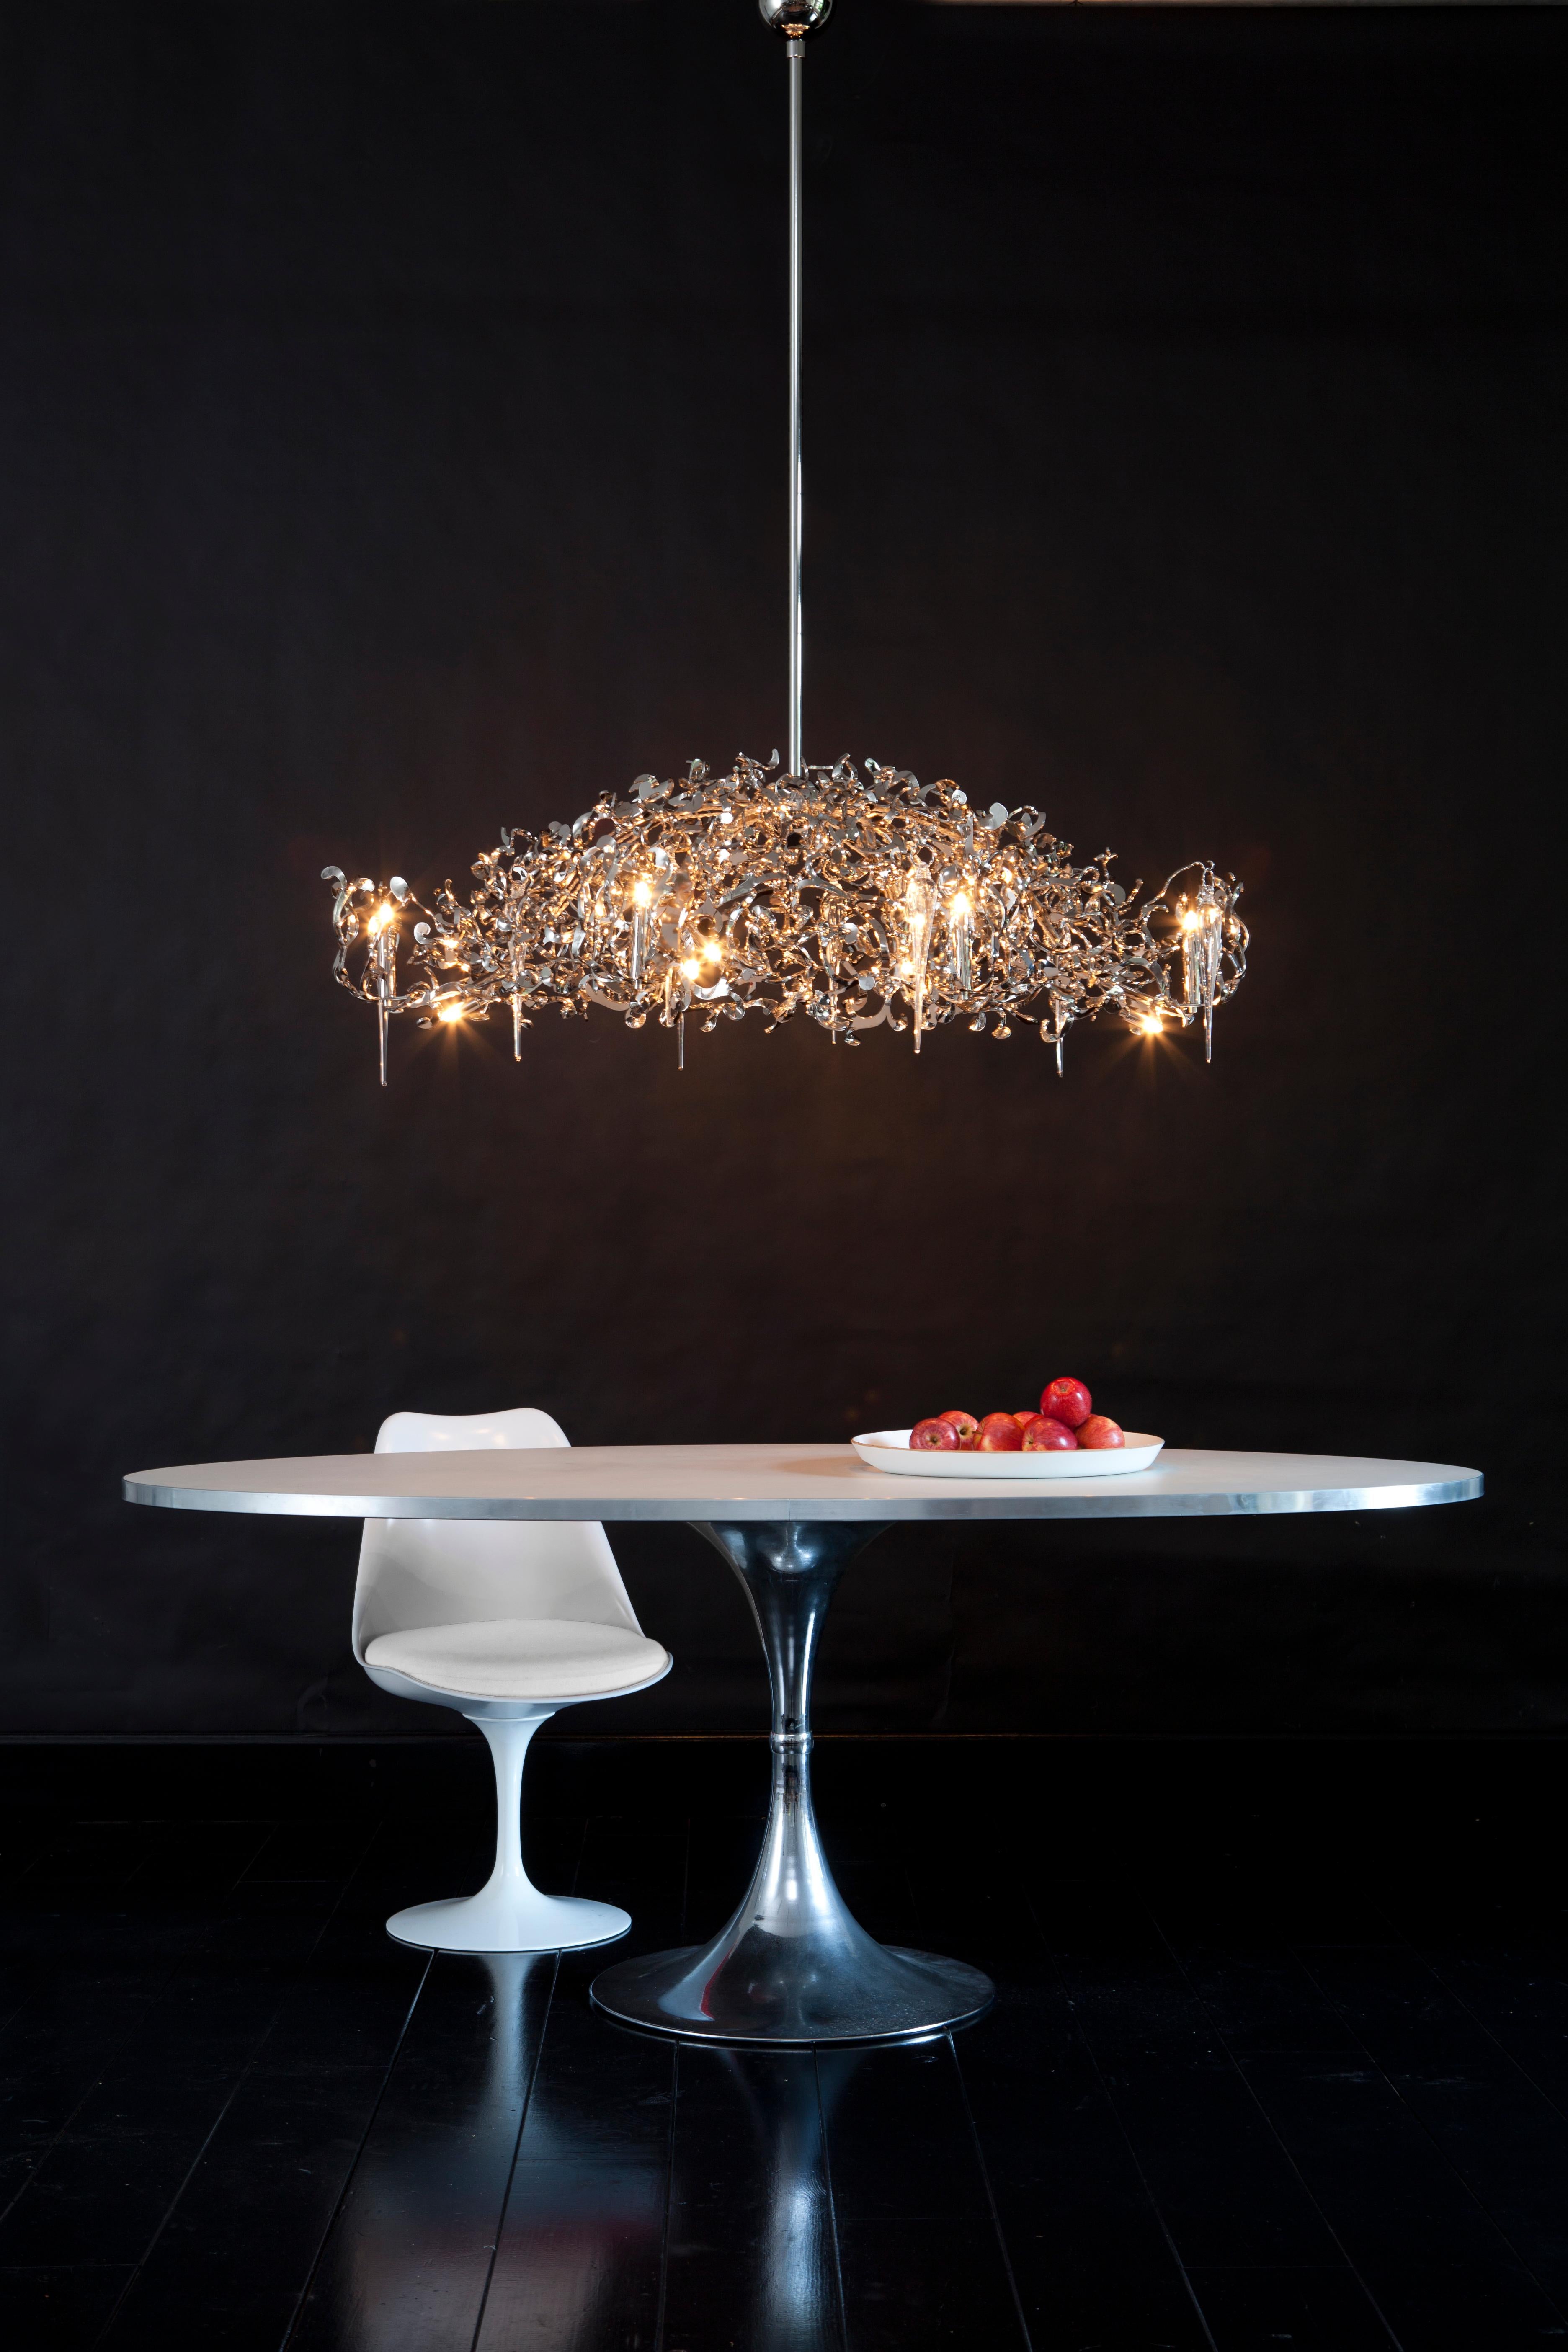 This modern chandelier in an oval shape and nickel finish is part of the Flower Power collection, designed by William Brand, founder of Brand van Egmond. Using the latest techniques to cut flowery sensual shapes out of steel plates, Flower Power is